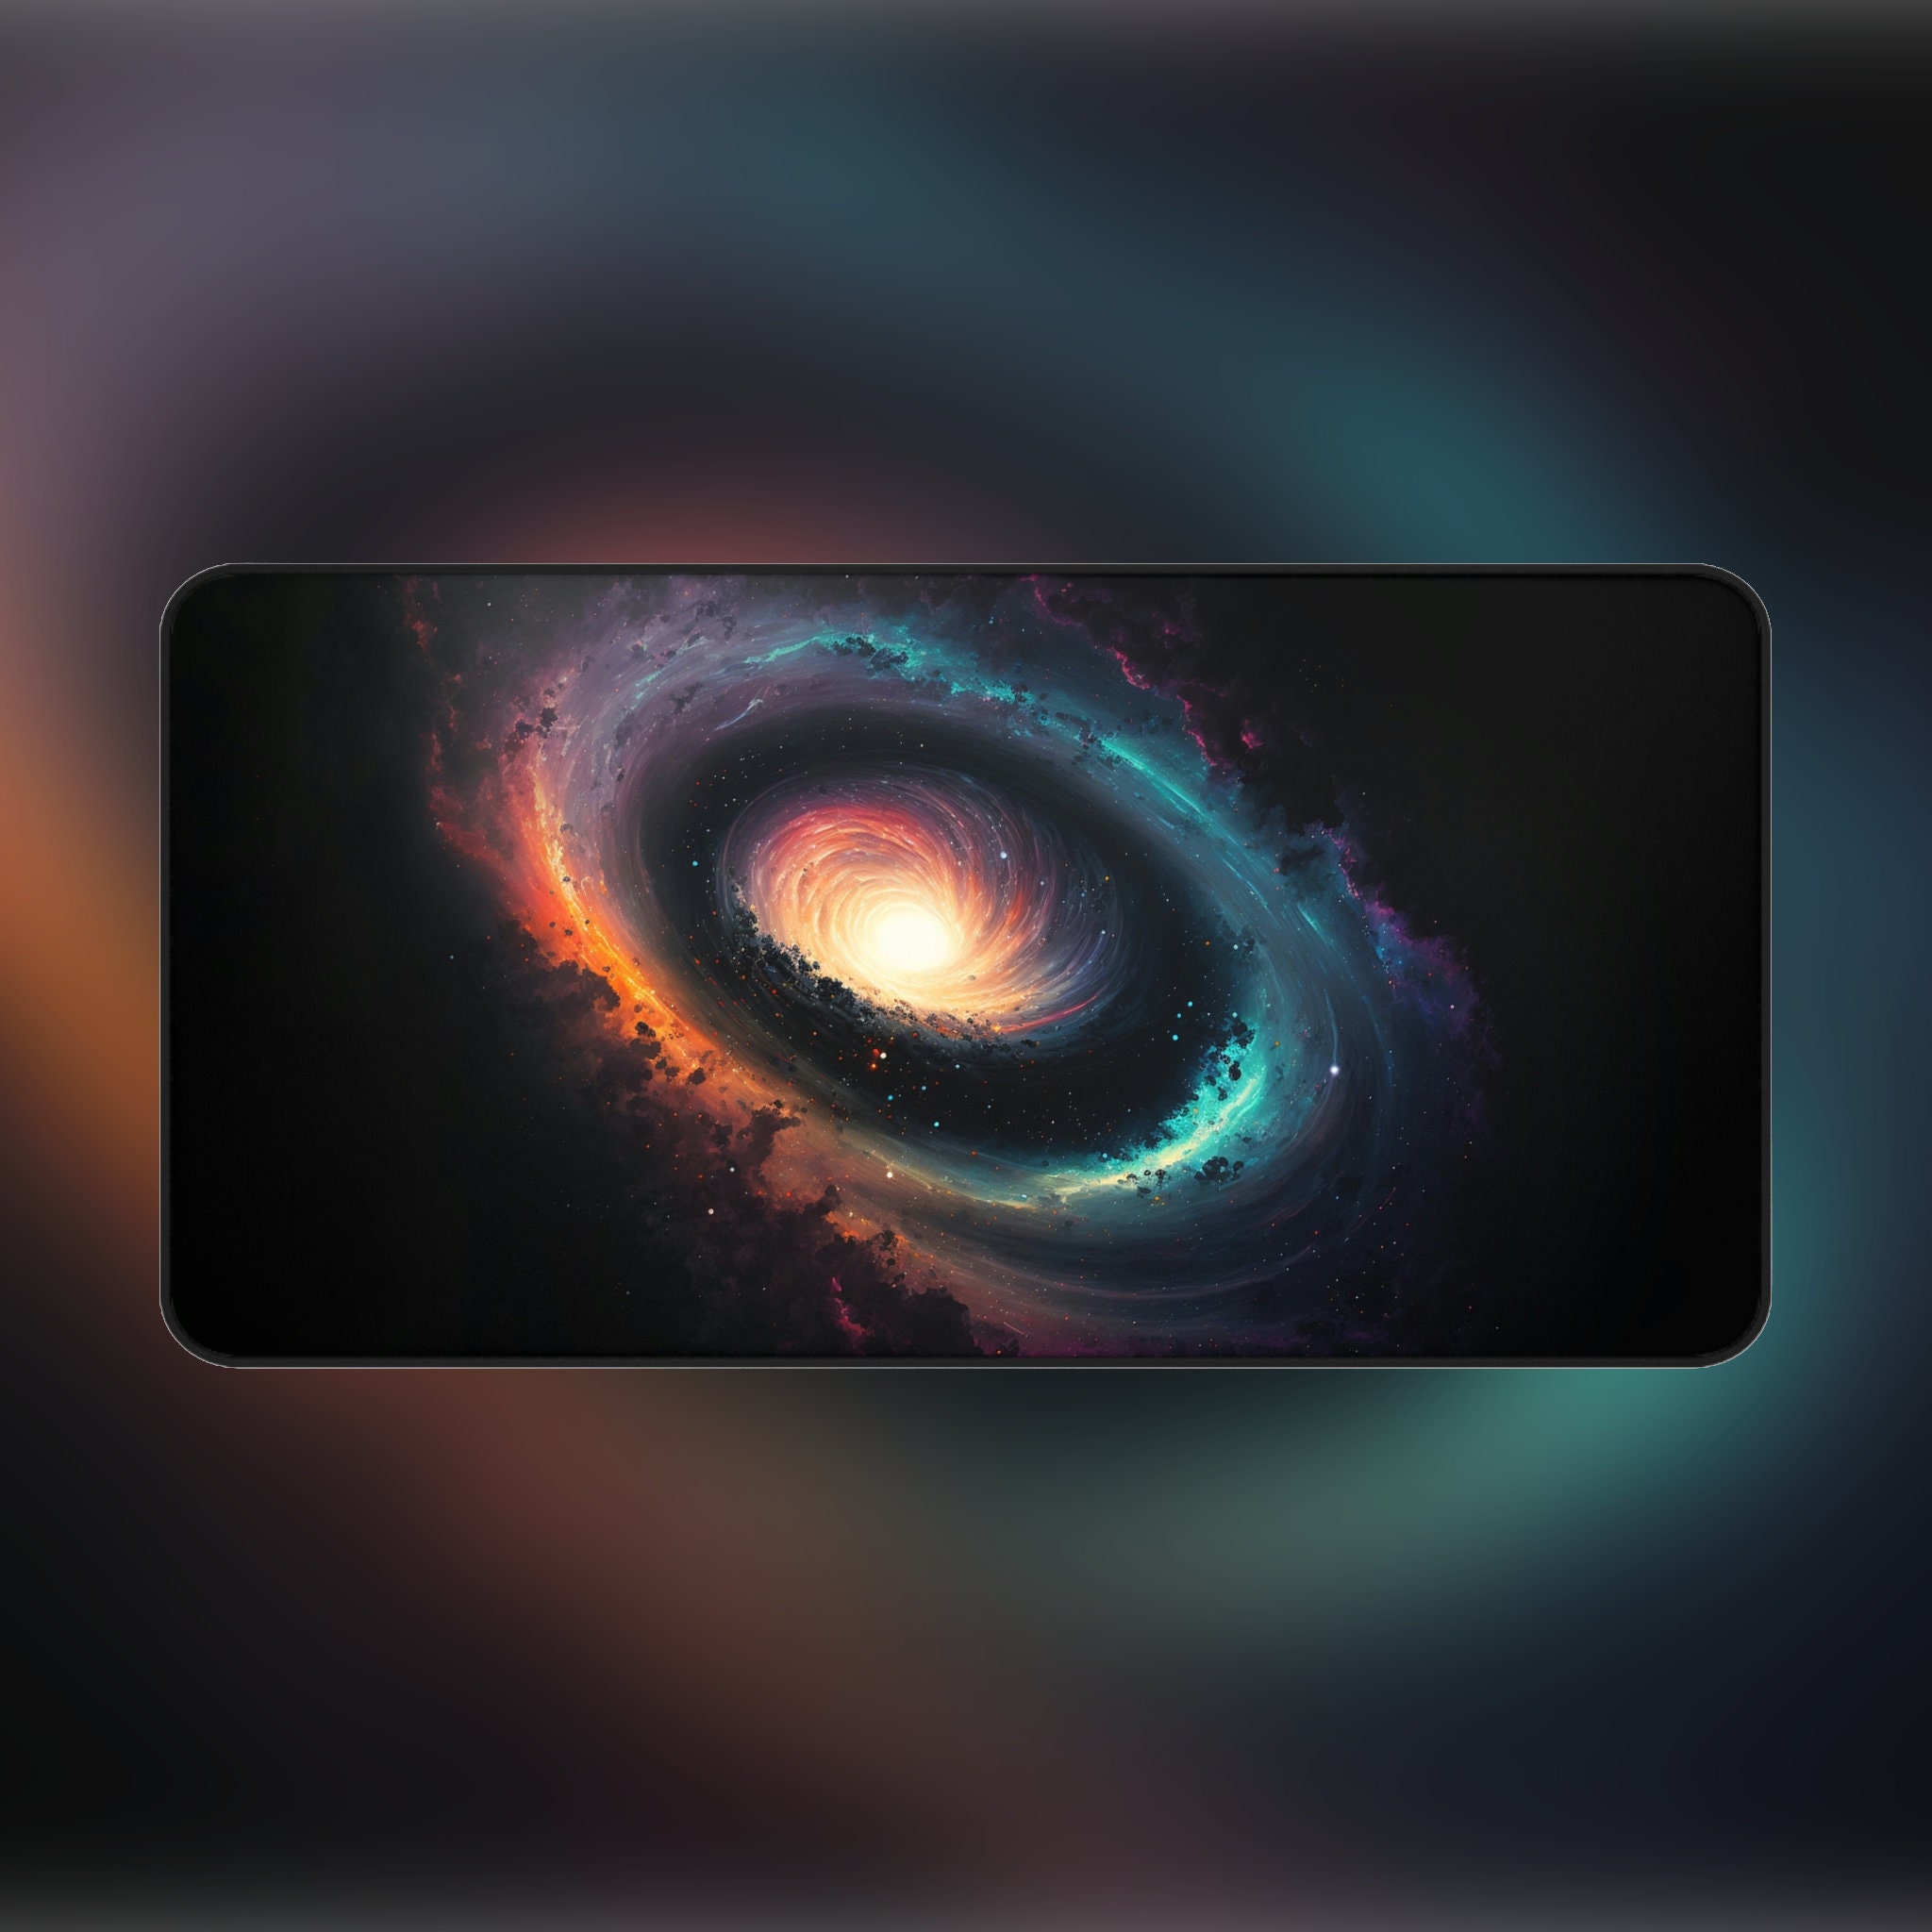 Galaxy Apple - iPad Wallpaper for iPhone 11, Pro Max, X, 8, 7, 6 - Free  Download on 3Wallpapers